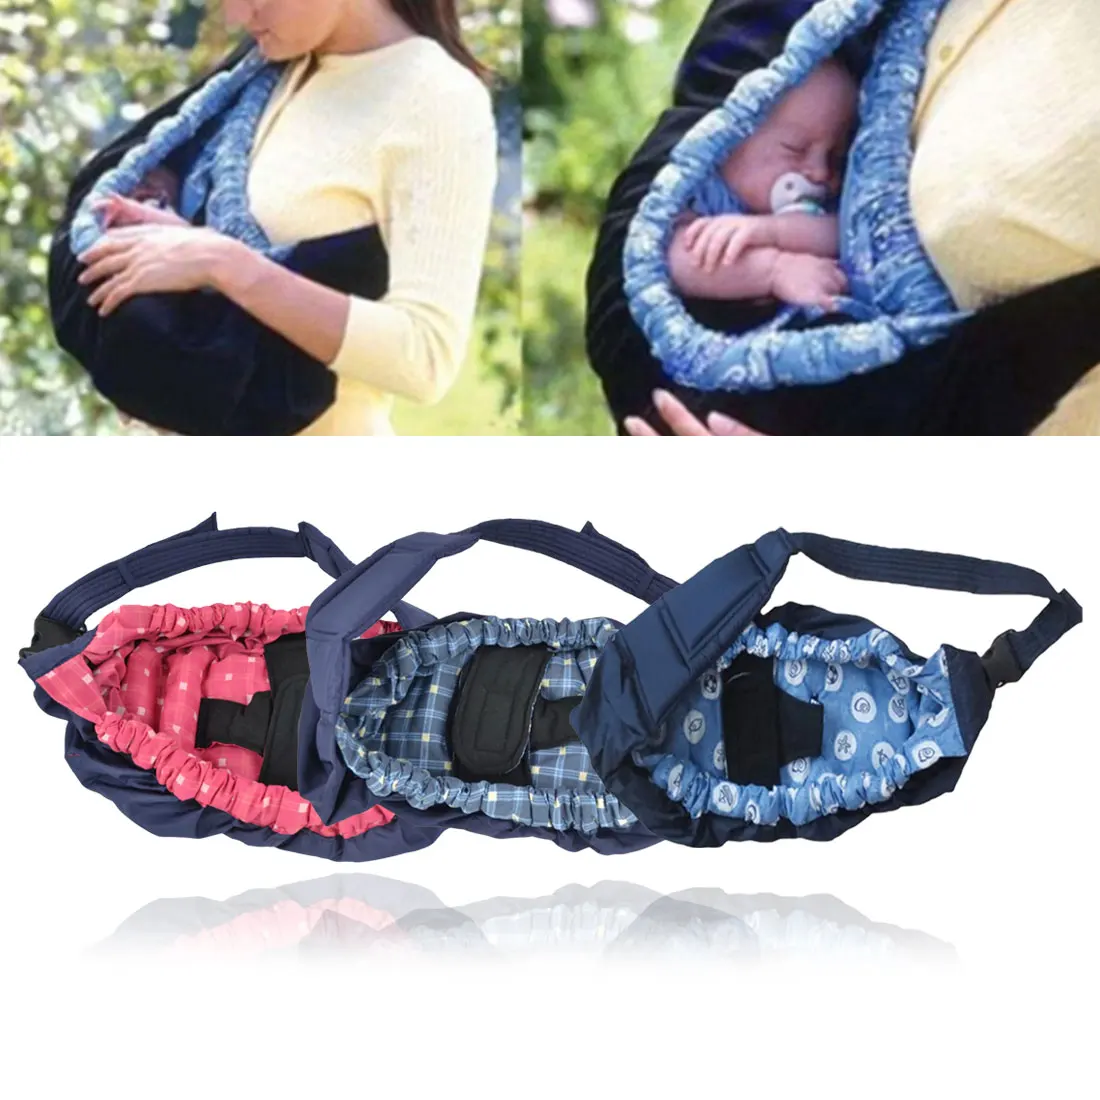 Newborn Baby Carrier Swaddle Sling Infant Nursing Pouch Front Carry Wrap Pure Cotton Breastfeed Feeding Carry Bag